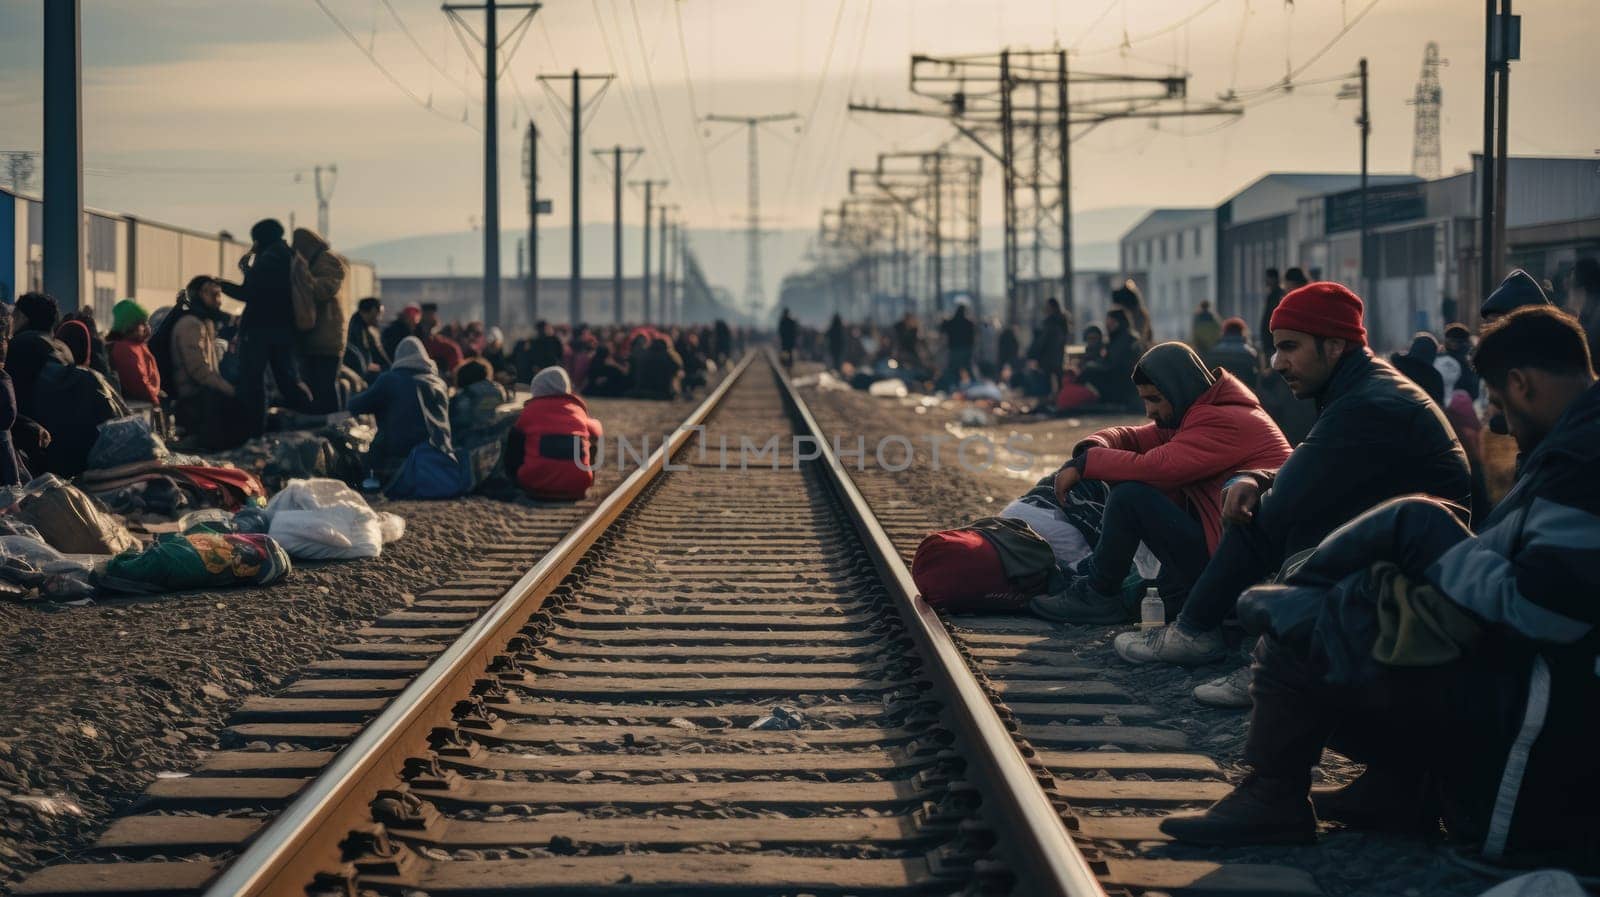 Migrants waiting for clearance at customs on the railway tracks. by natali_brill